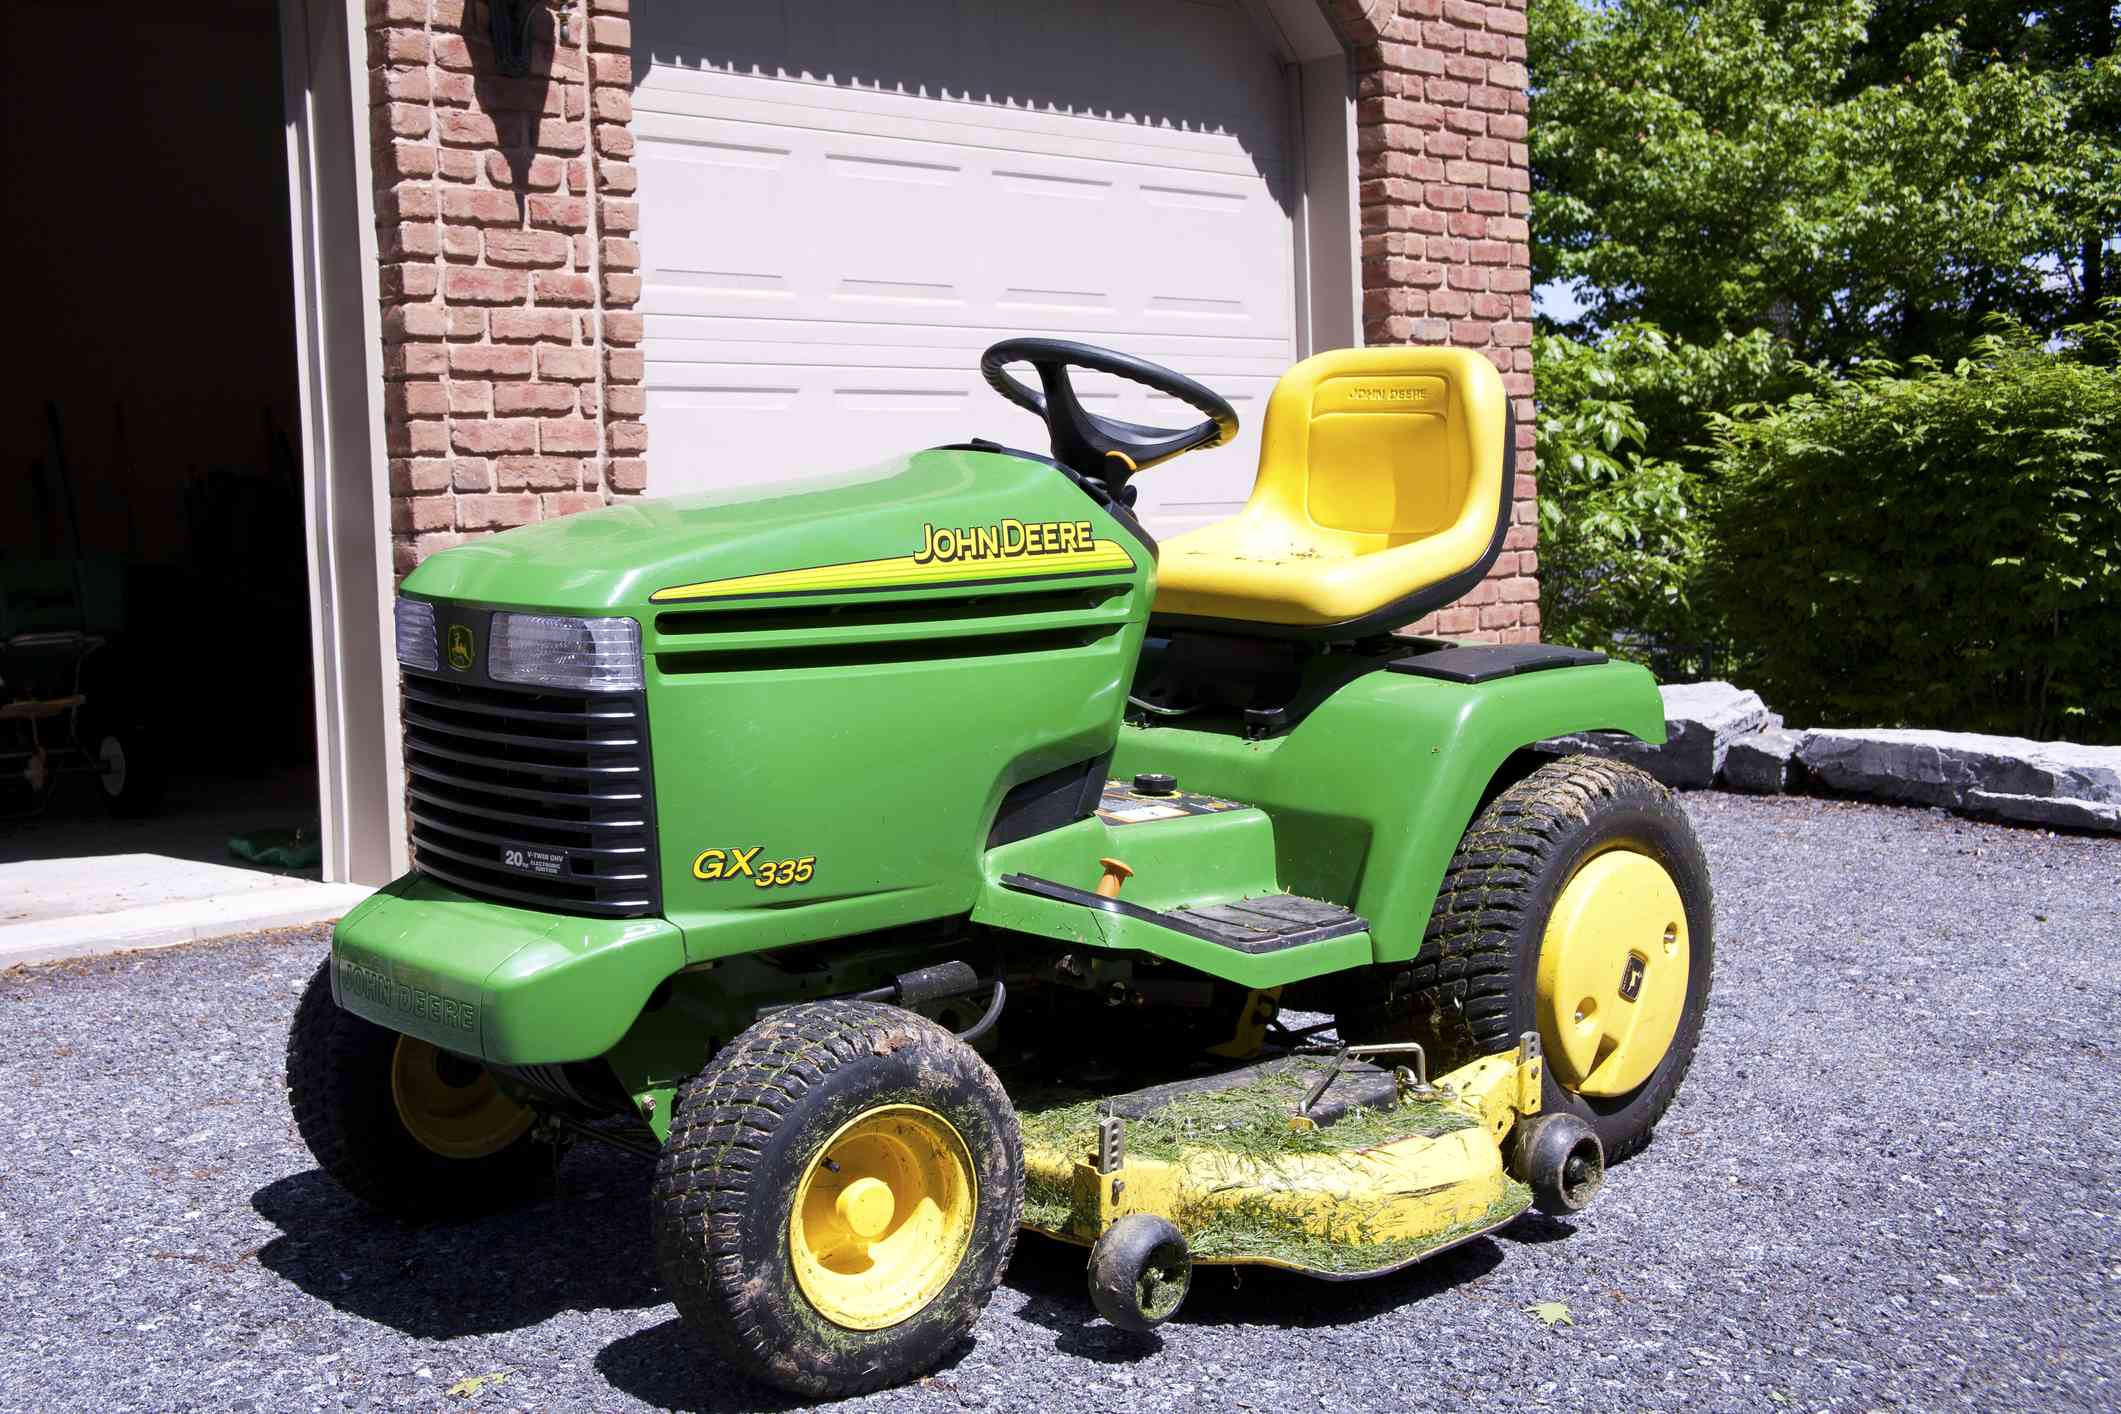 How to Bypass Safety Switch on John Deere Lawn Mower? (Find out)